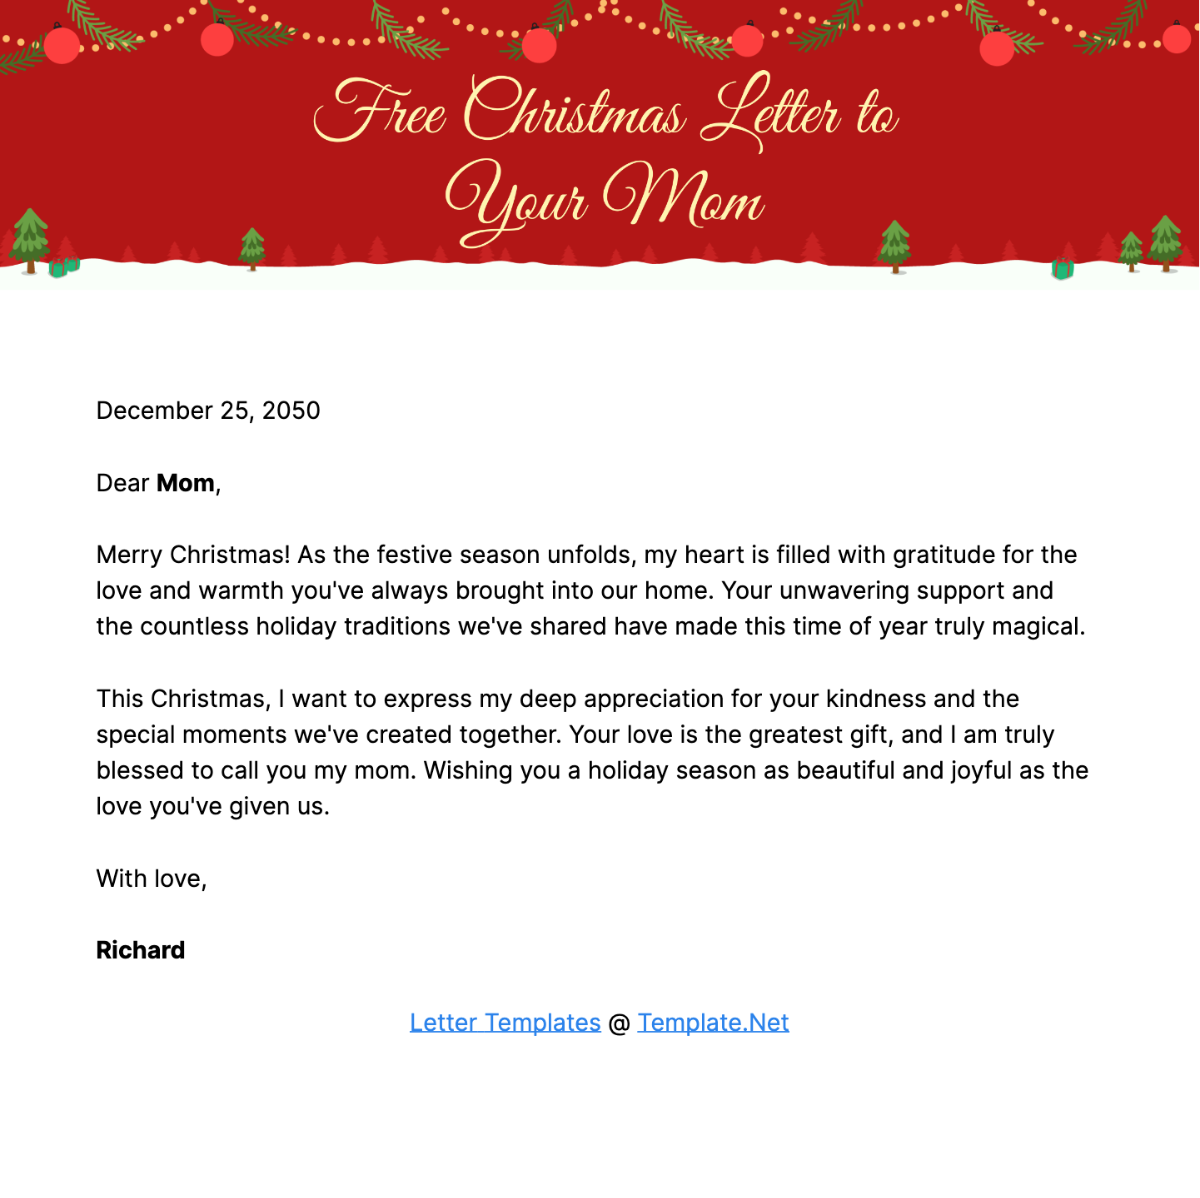 Christmas Letter to Your Mom Template